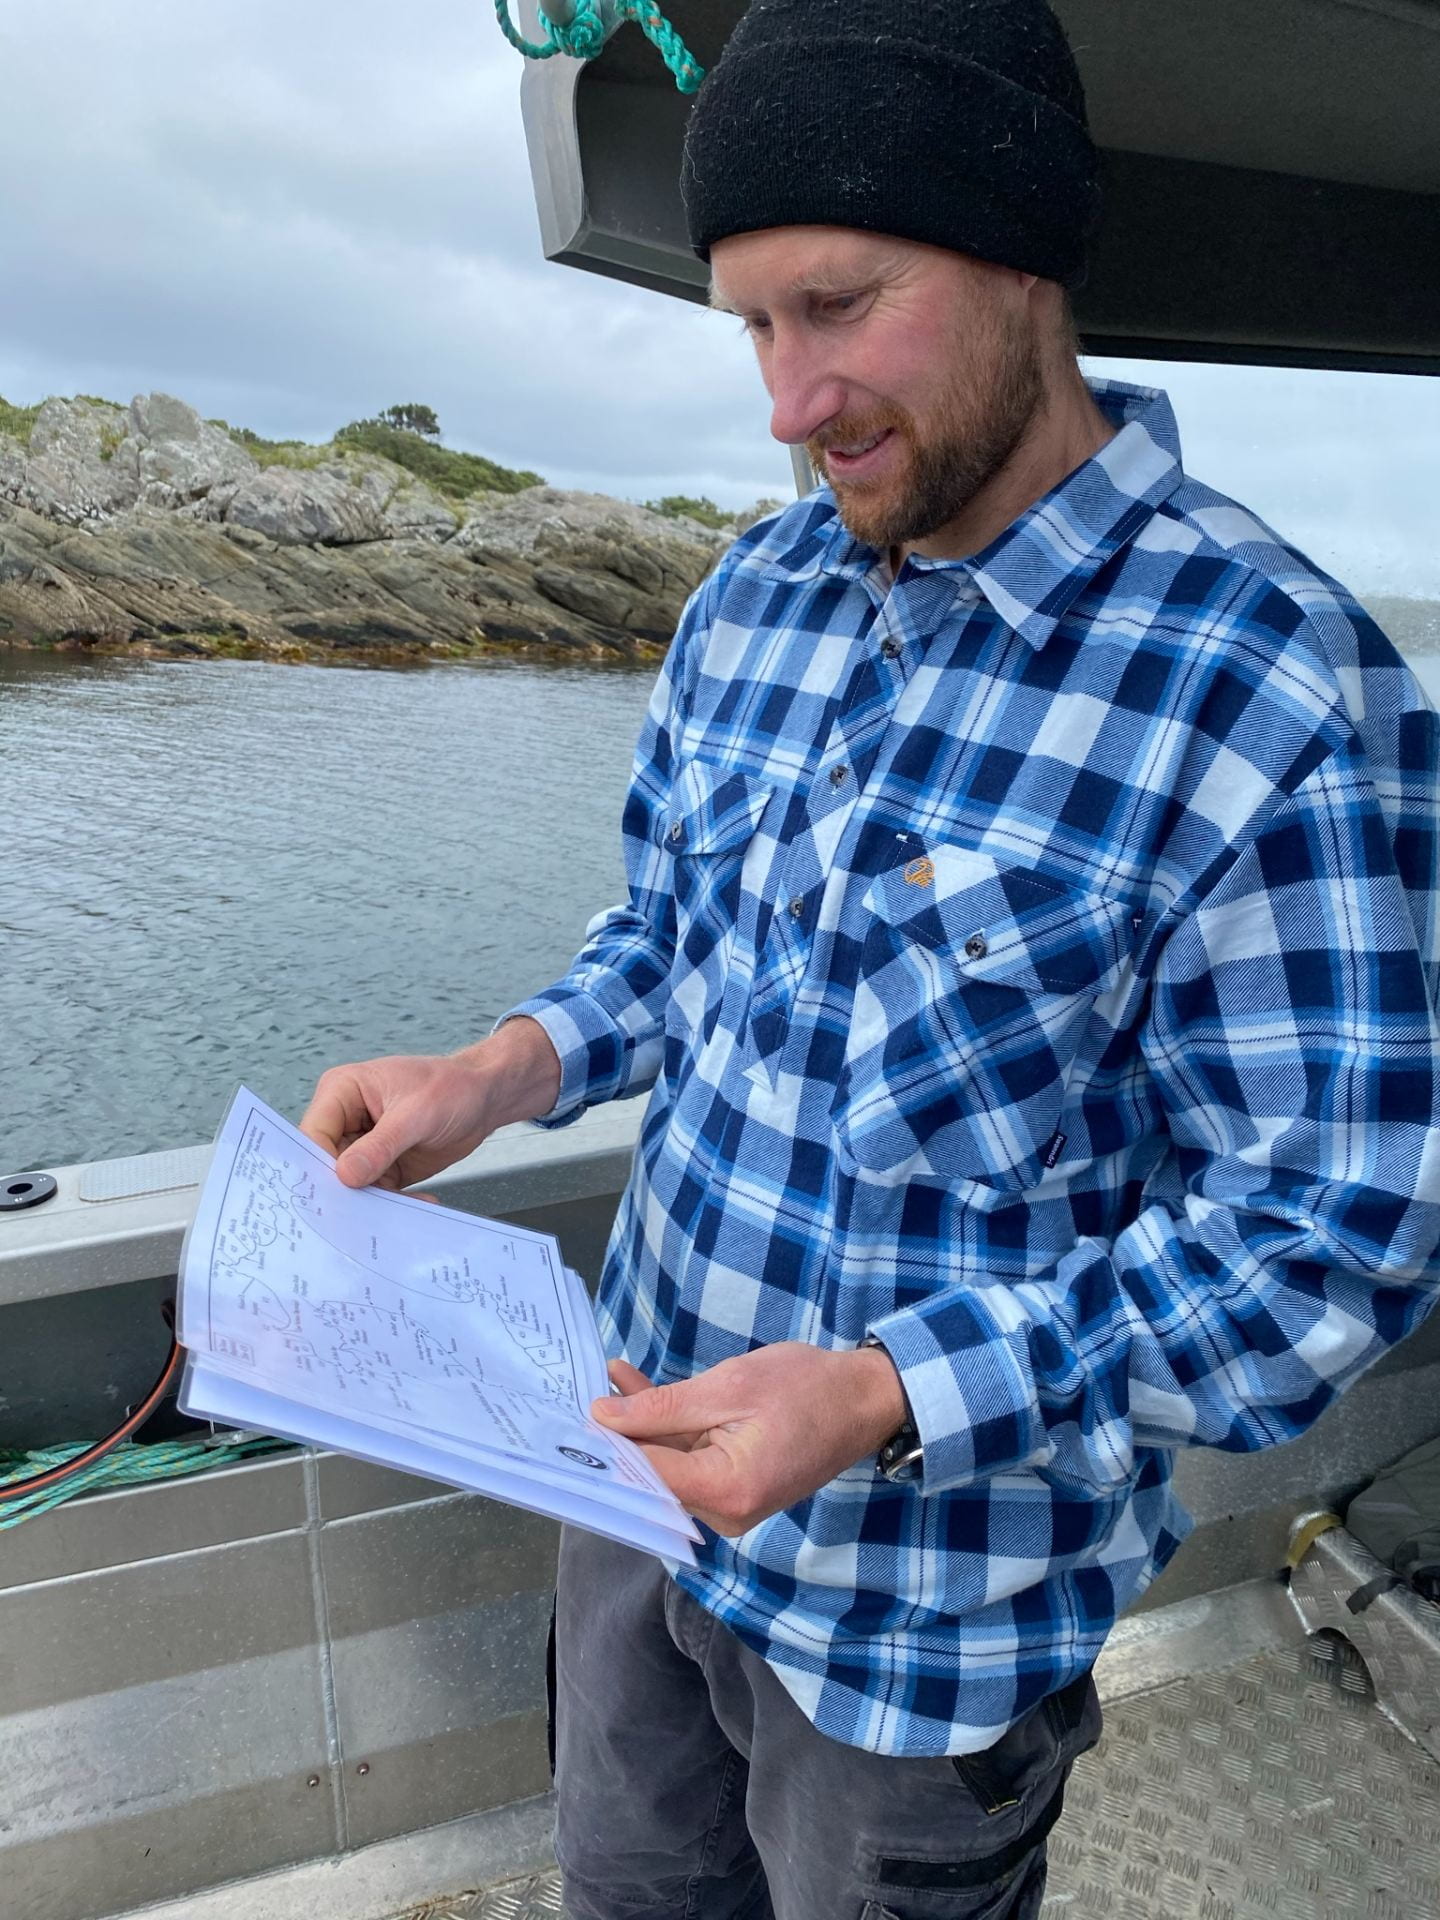 A man in a blue-and-white flannel shirt and a beanie is standing on a boat, holding a map in his hands and smiling. The background is grey sea and sky, with craggy rocks.